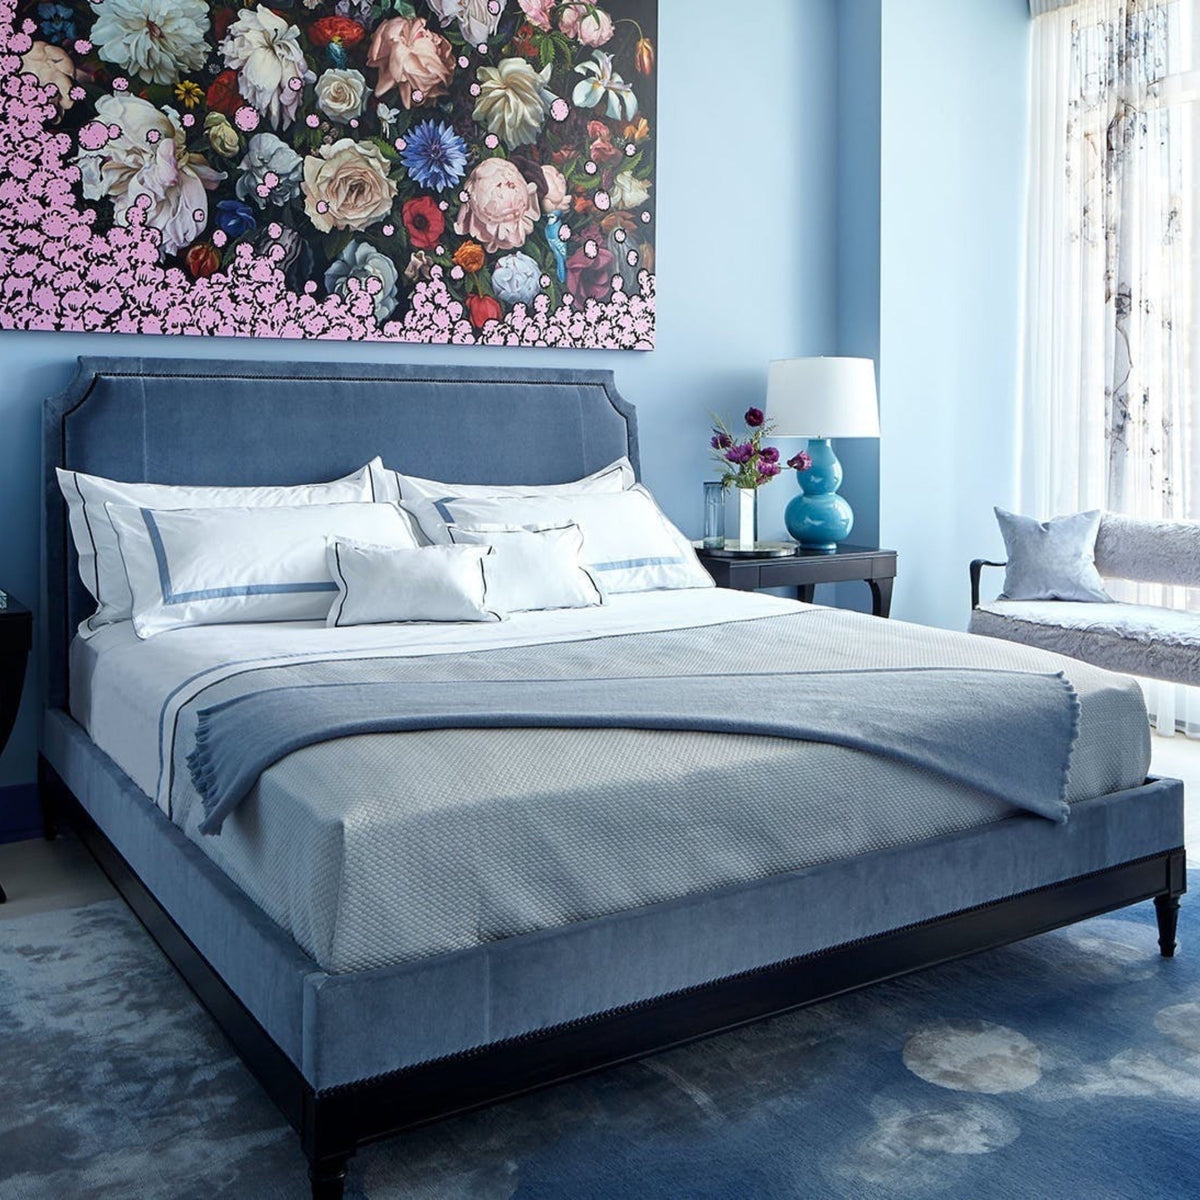 Matouk Agnes Throw in Hazy Blue Color on a Bed